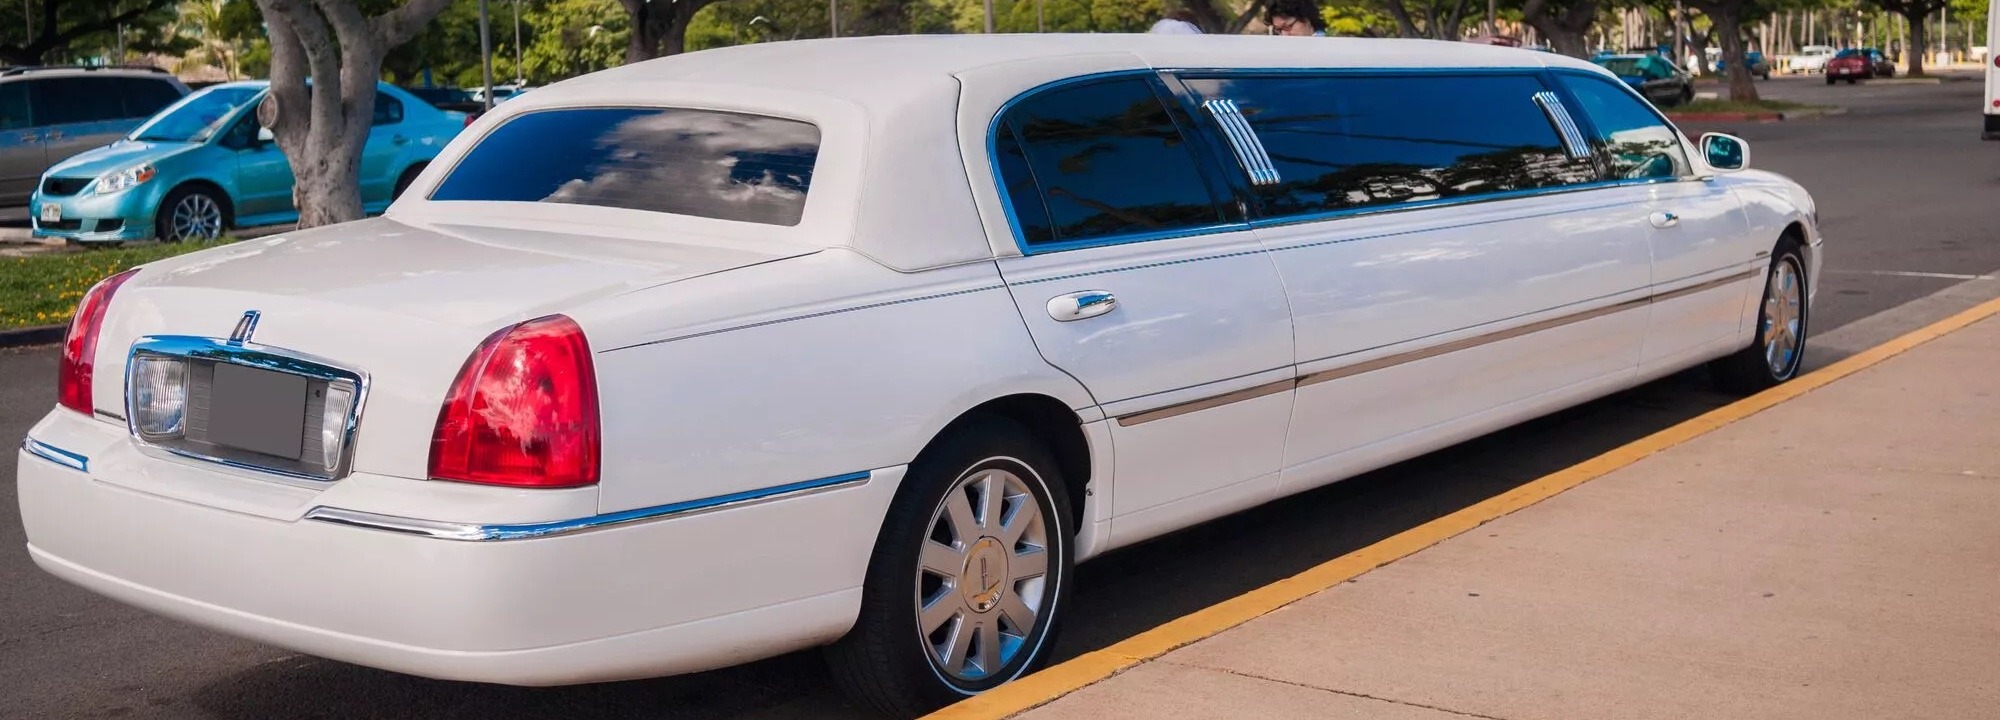 24hr Limo Towing Services